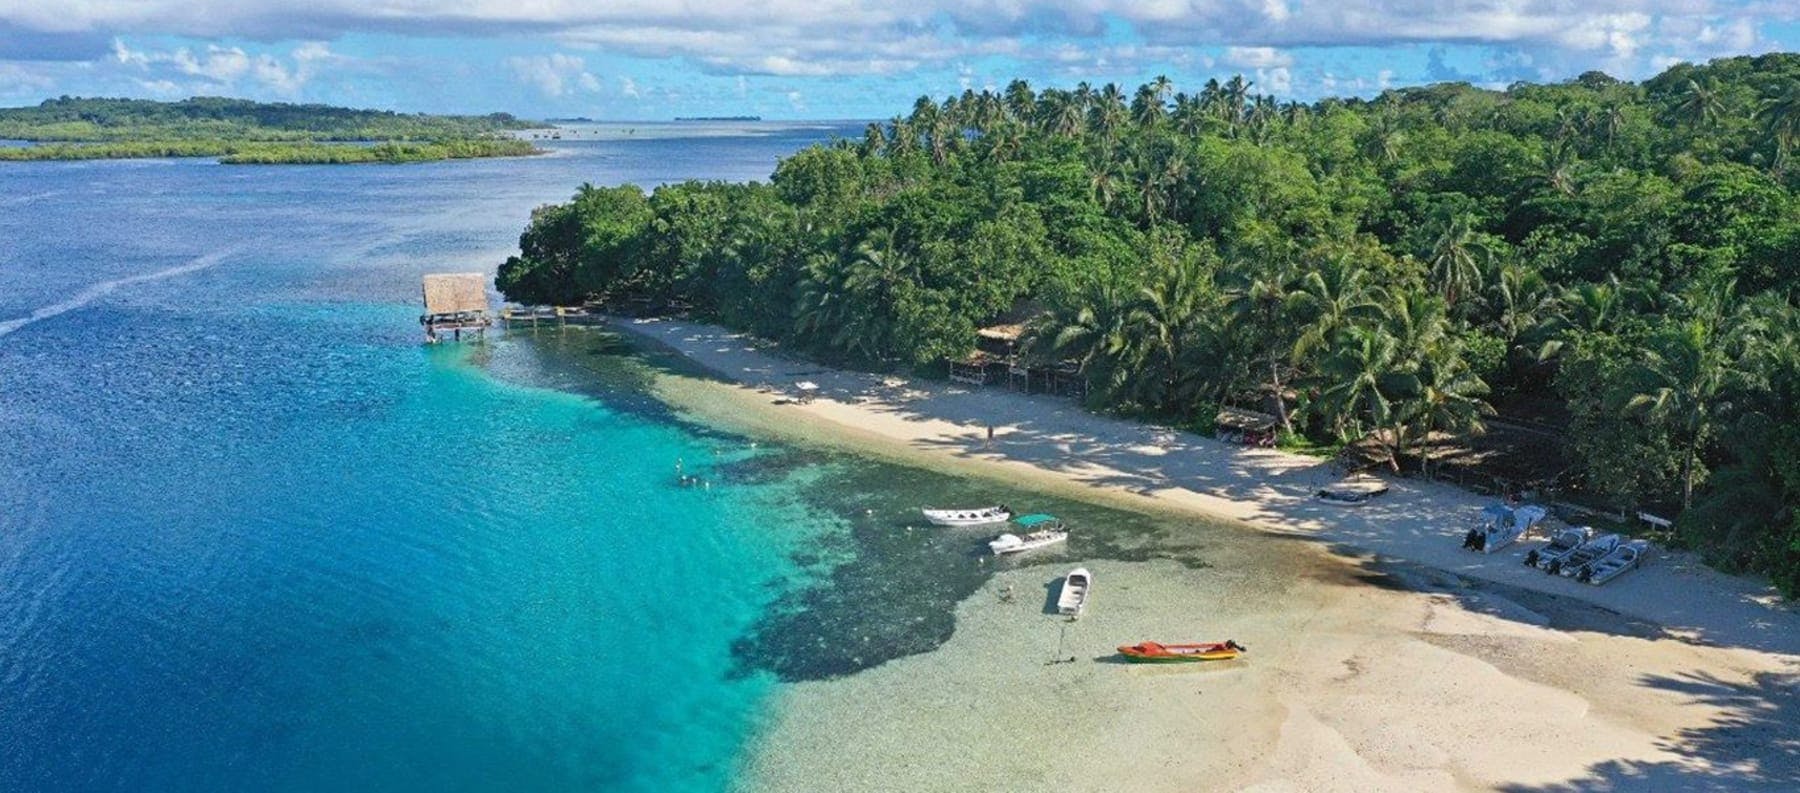 Solomon Islands has some of the best diving in the world. 